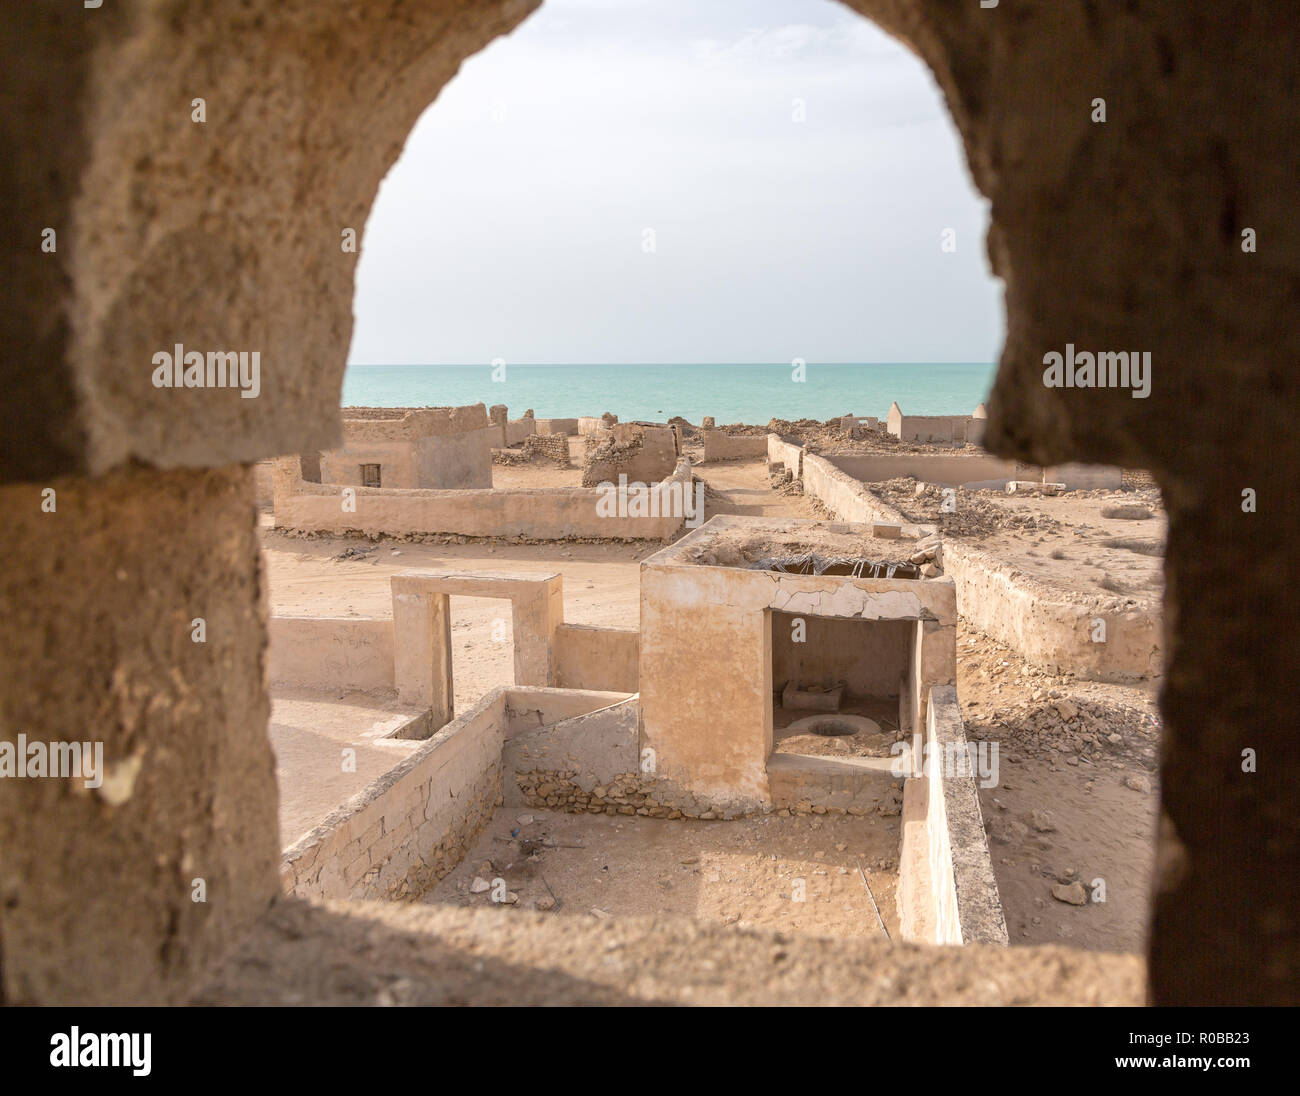 A view out of abandoned Mosque minaret's window to the sea. Ruined ancient old Arab town Al Jumail, Qatar. The desert at coast of Persian Gulf. Stock Photo